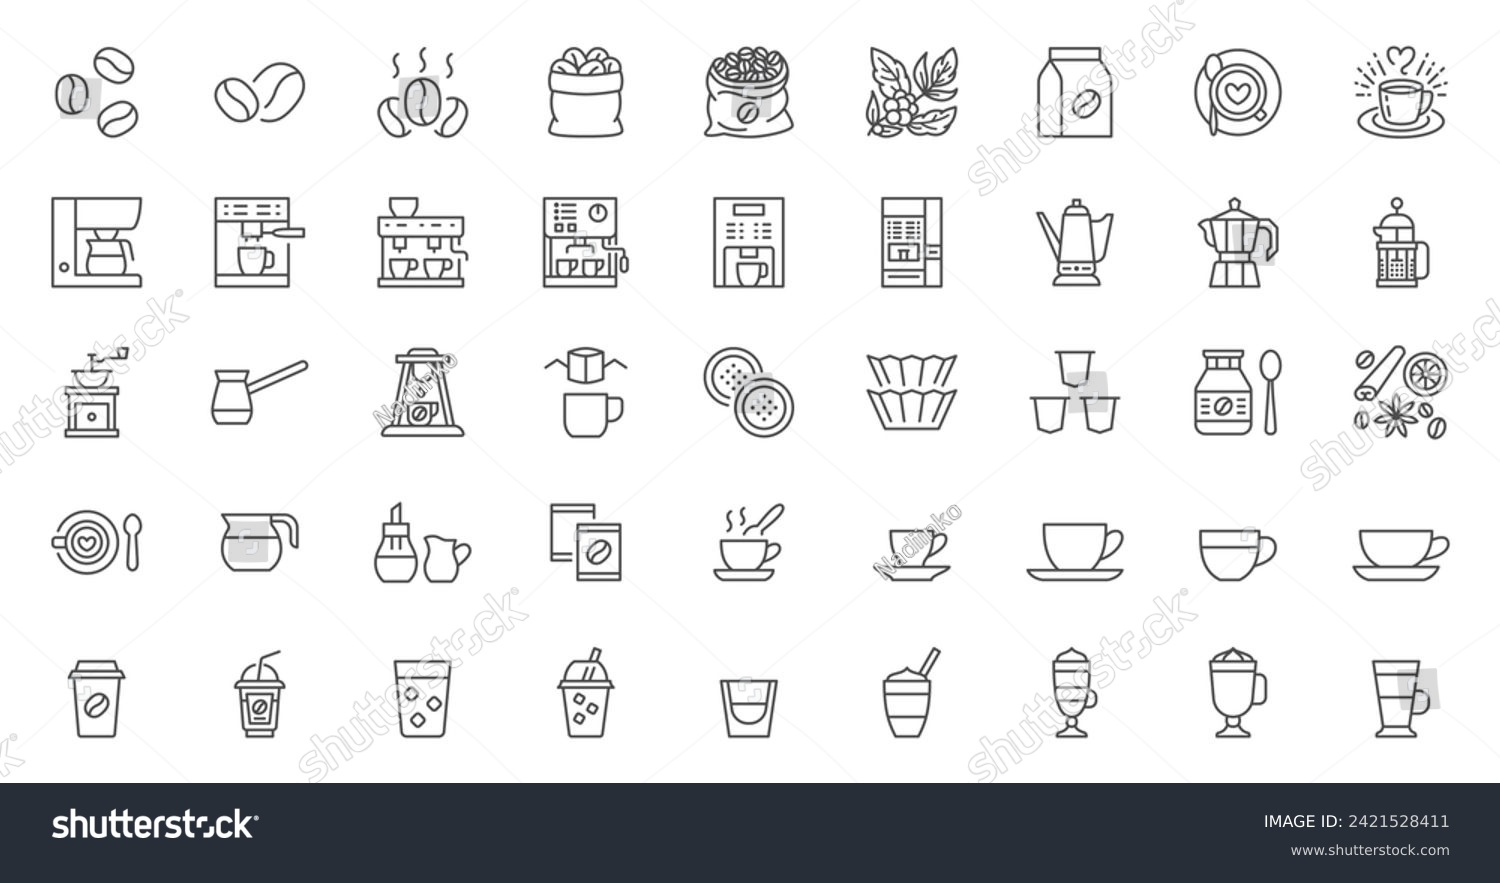 SVG of Coffee line icon set. Beans bag, roasting, turkish cezve, drip pods, percolator, chorreador, filters, capsules, espresso vector illustrations. Simple outline signs for cafe menu. Editable Stroke svg